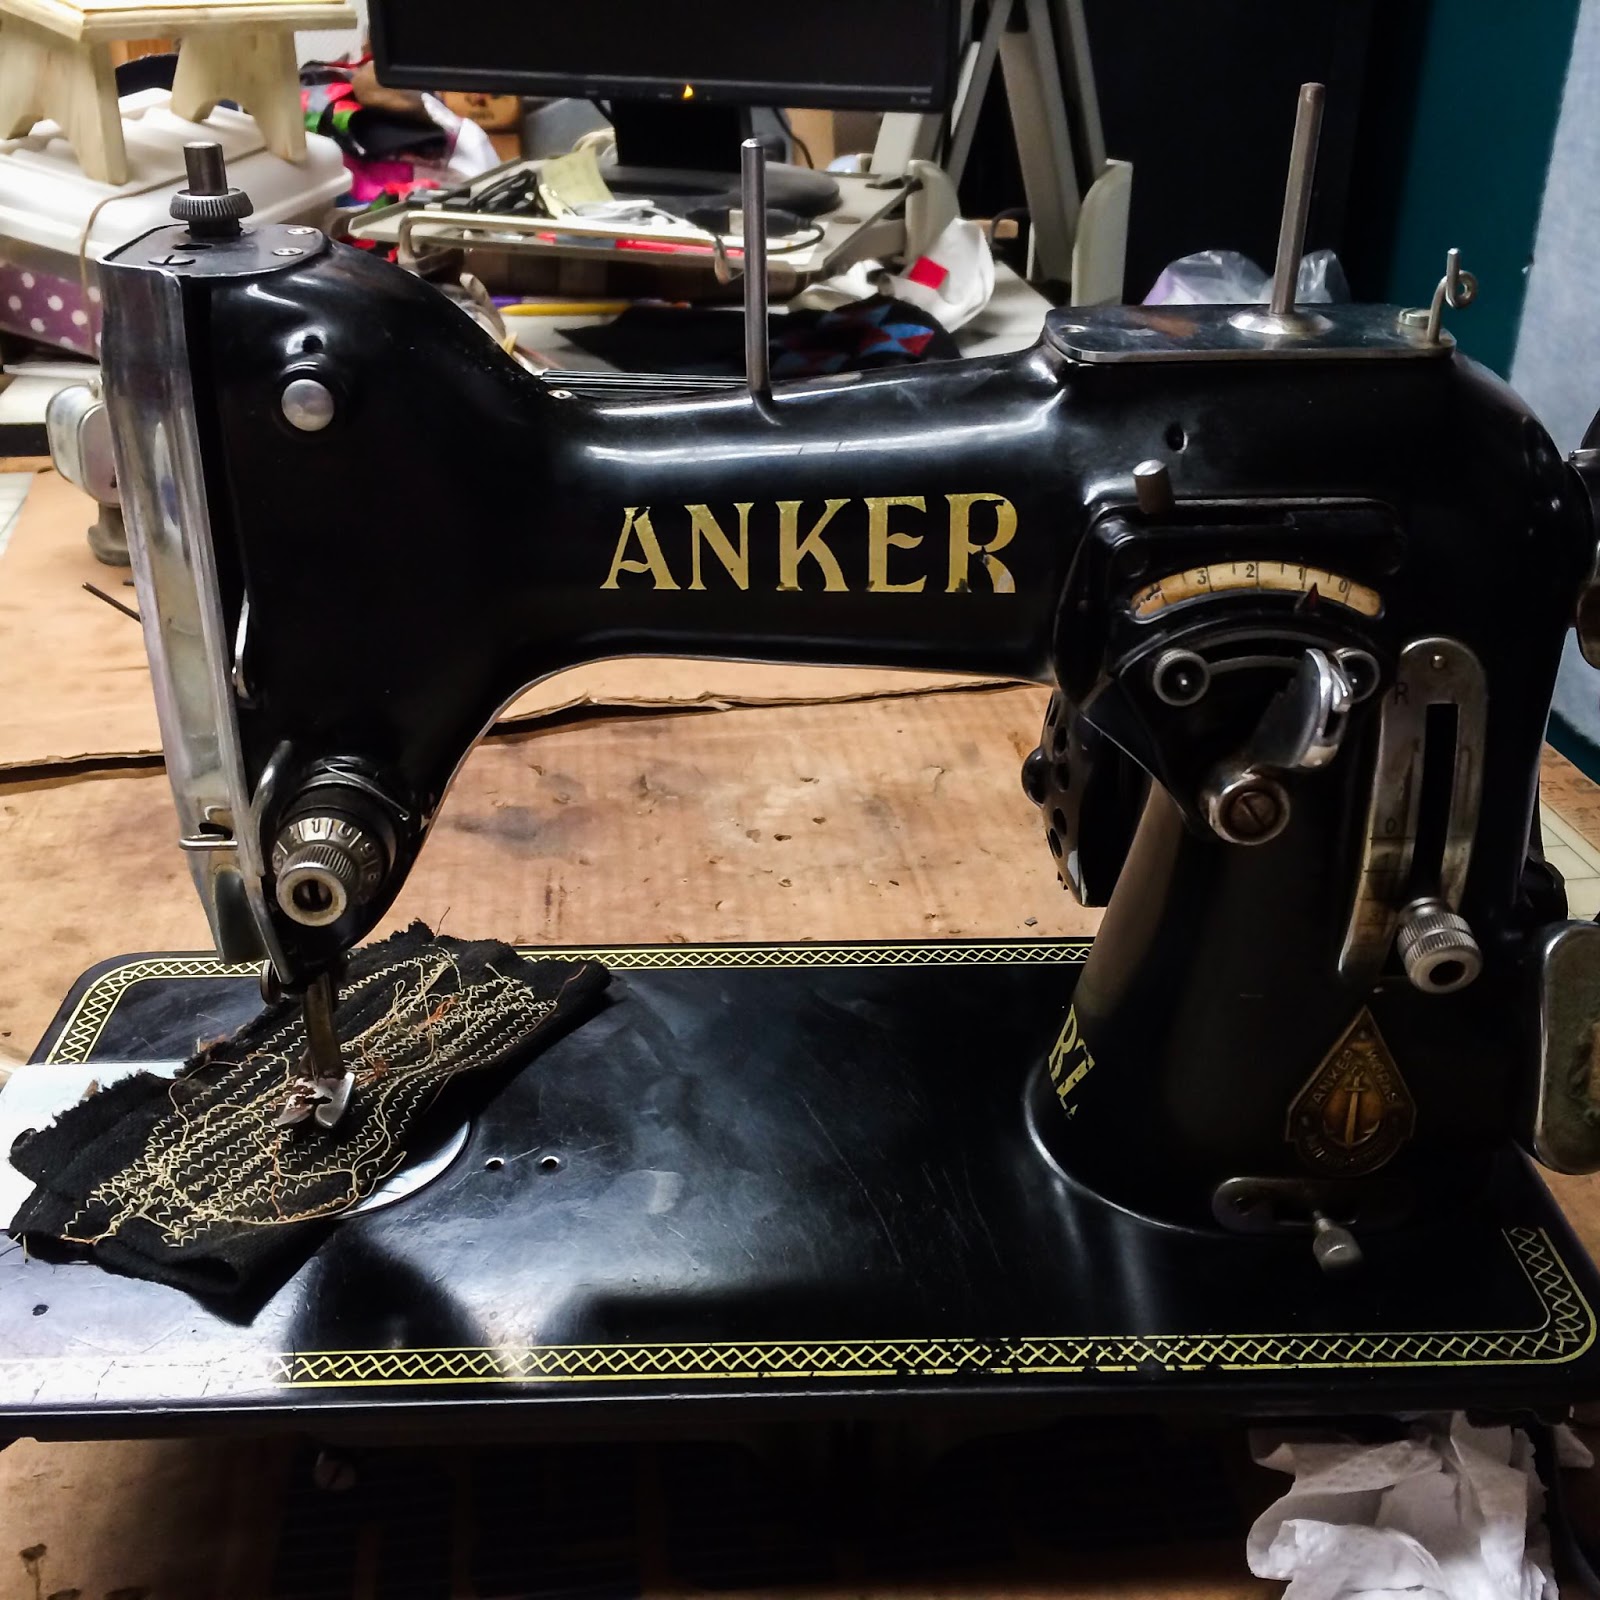 Introducing the Anker RZ and New Home AHC Type F - The Quilting Room